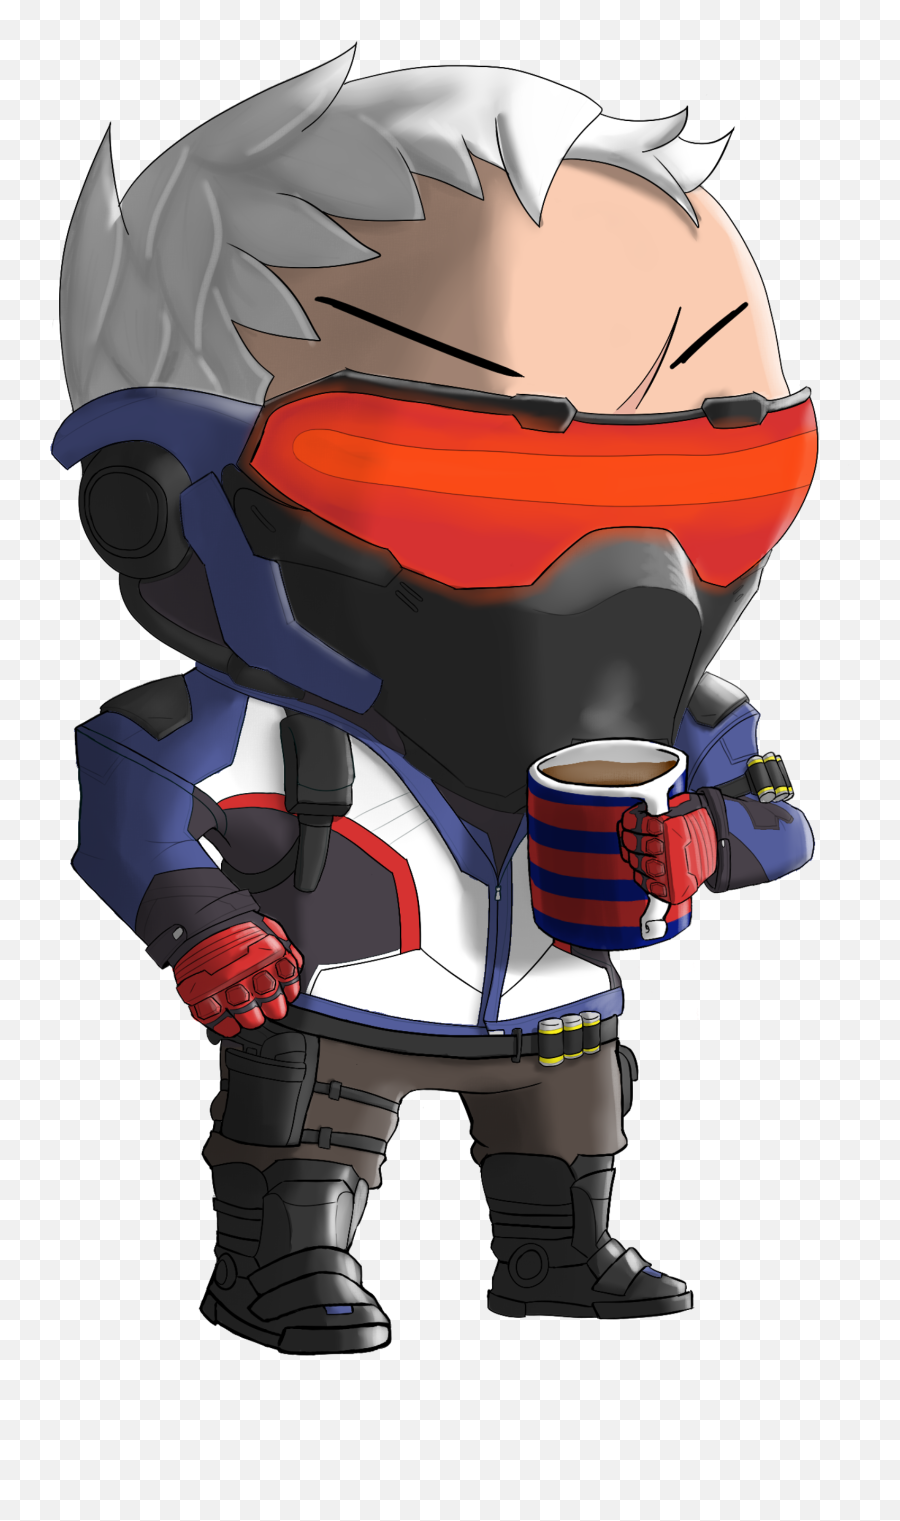 Soldier 76 Png - Chibi Style Kartun,Soldier 76 Png